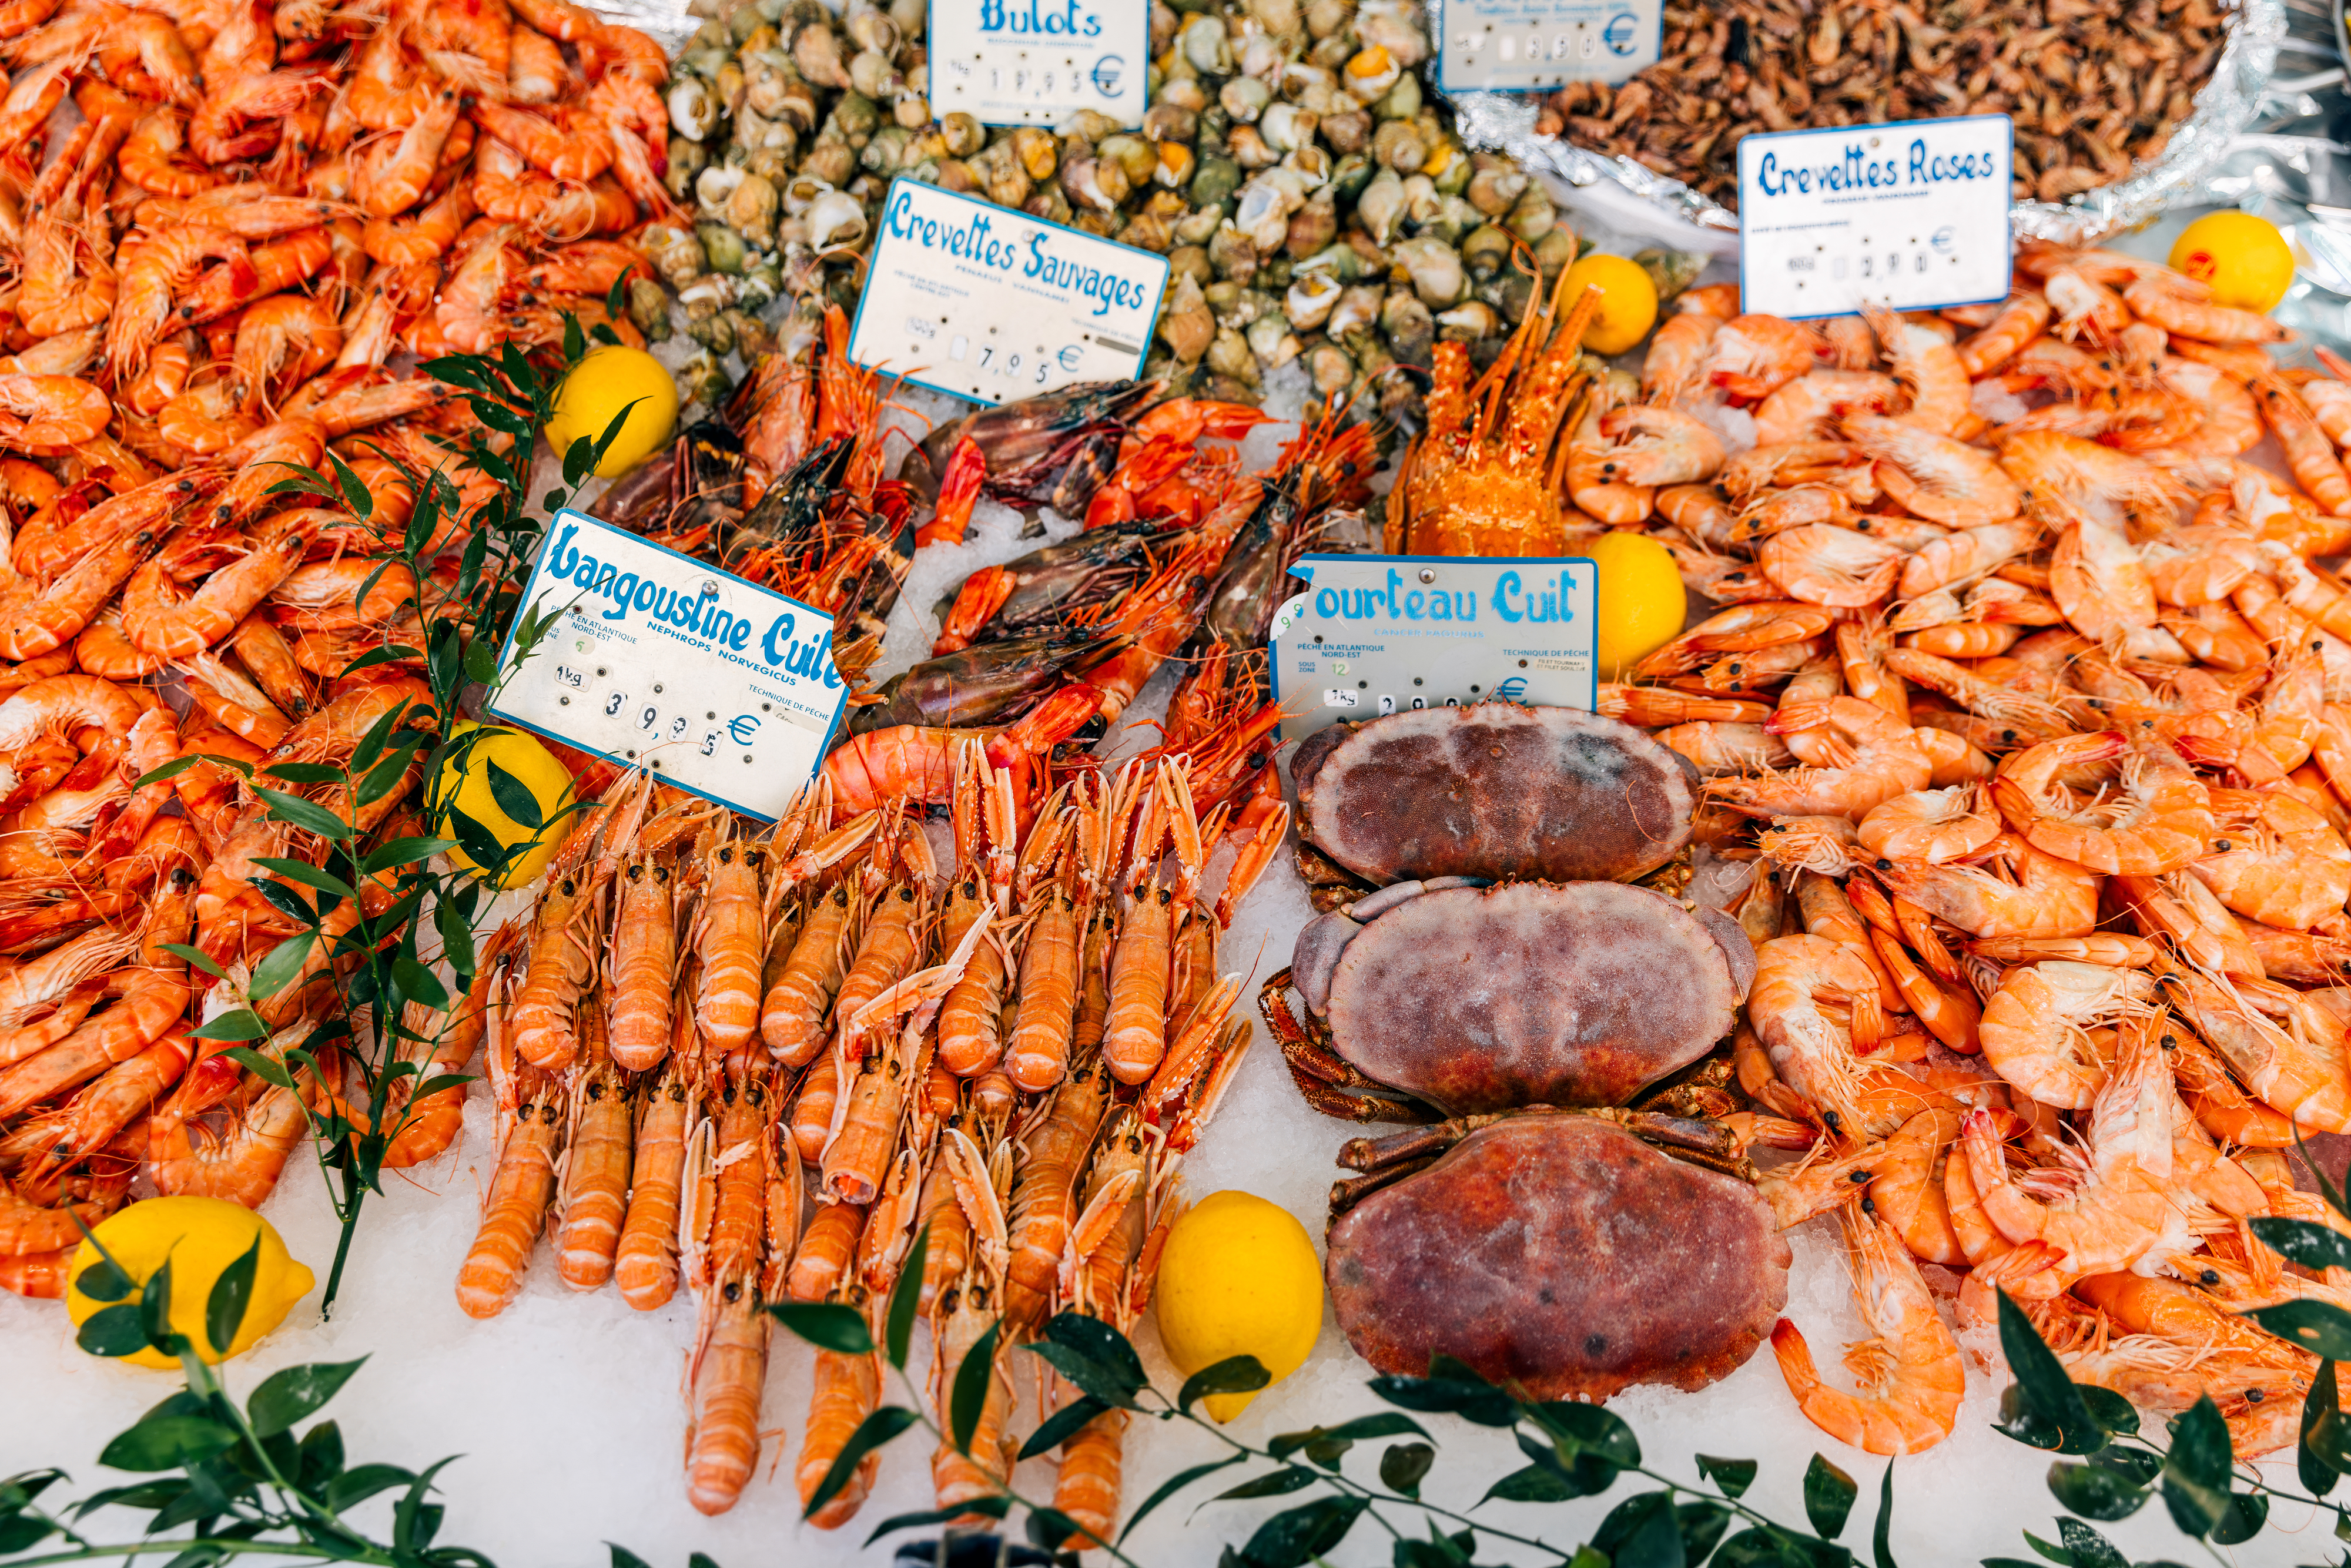 A variety of seafood including shrimp and crab displayed for sale with labeled prices